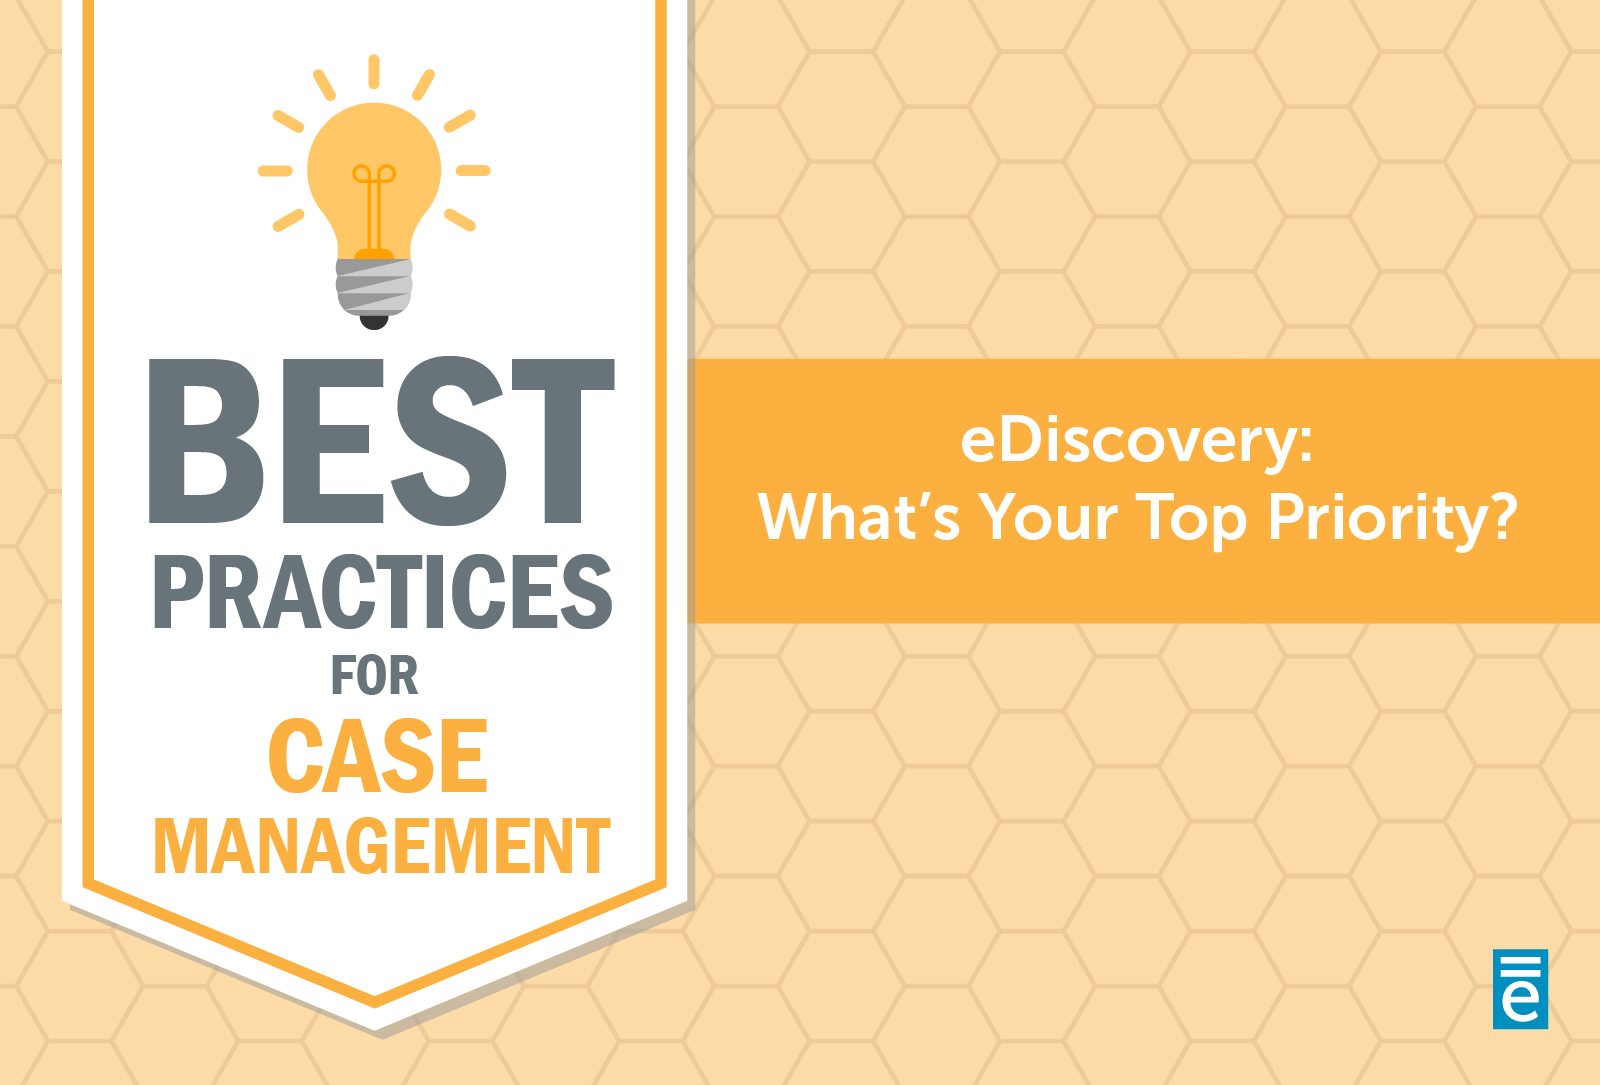 eDiscovery: What’s Your Top Priority?